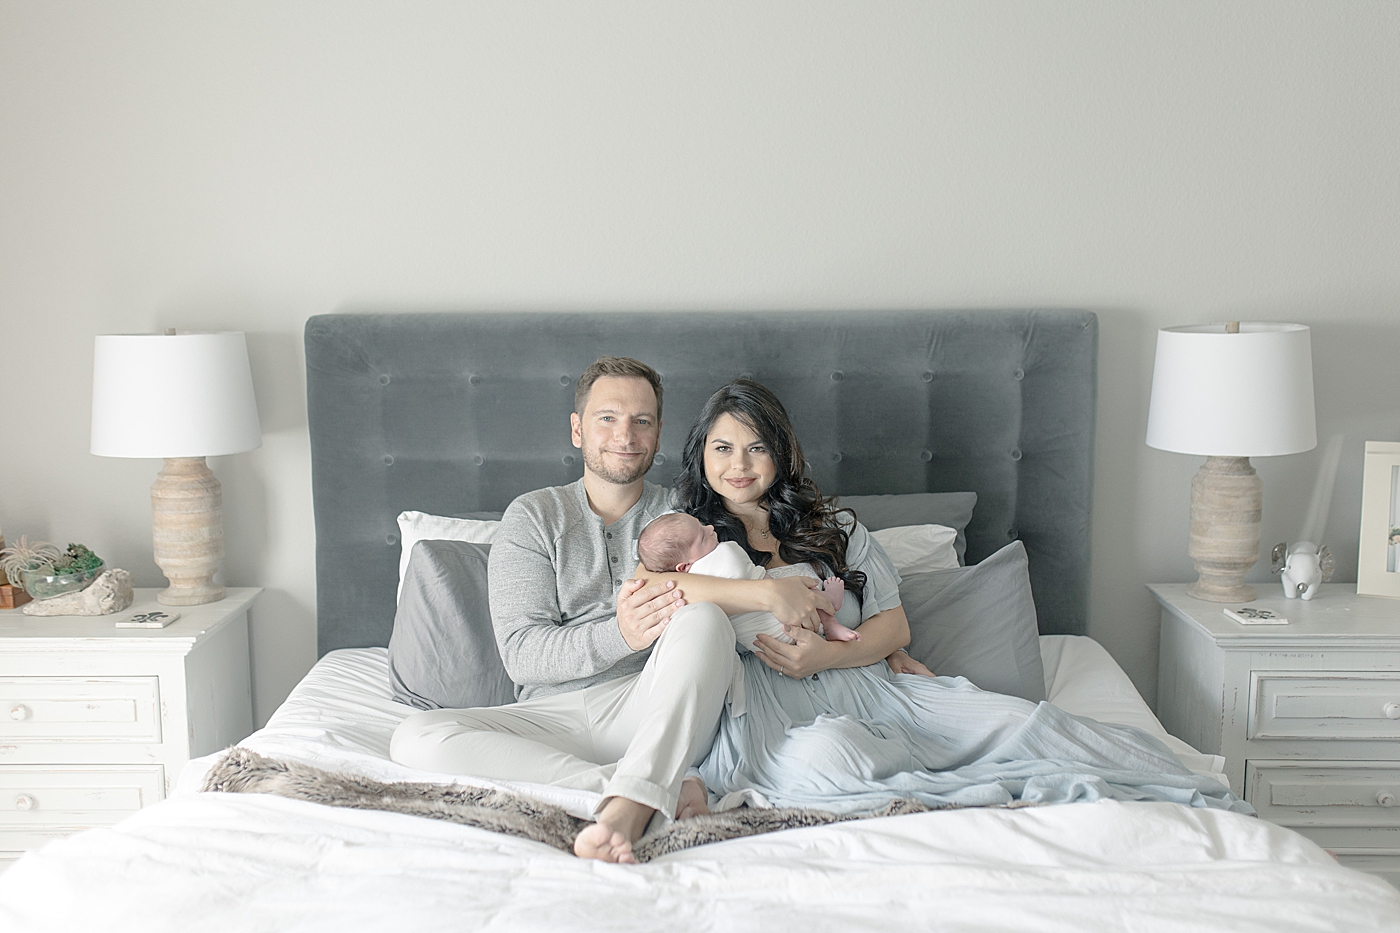 Dad and mom with newborn baby on their bed | Photo by Little Sunshine Photography